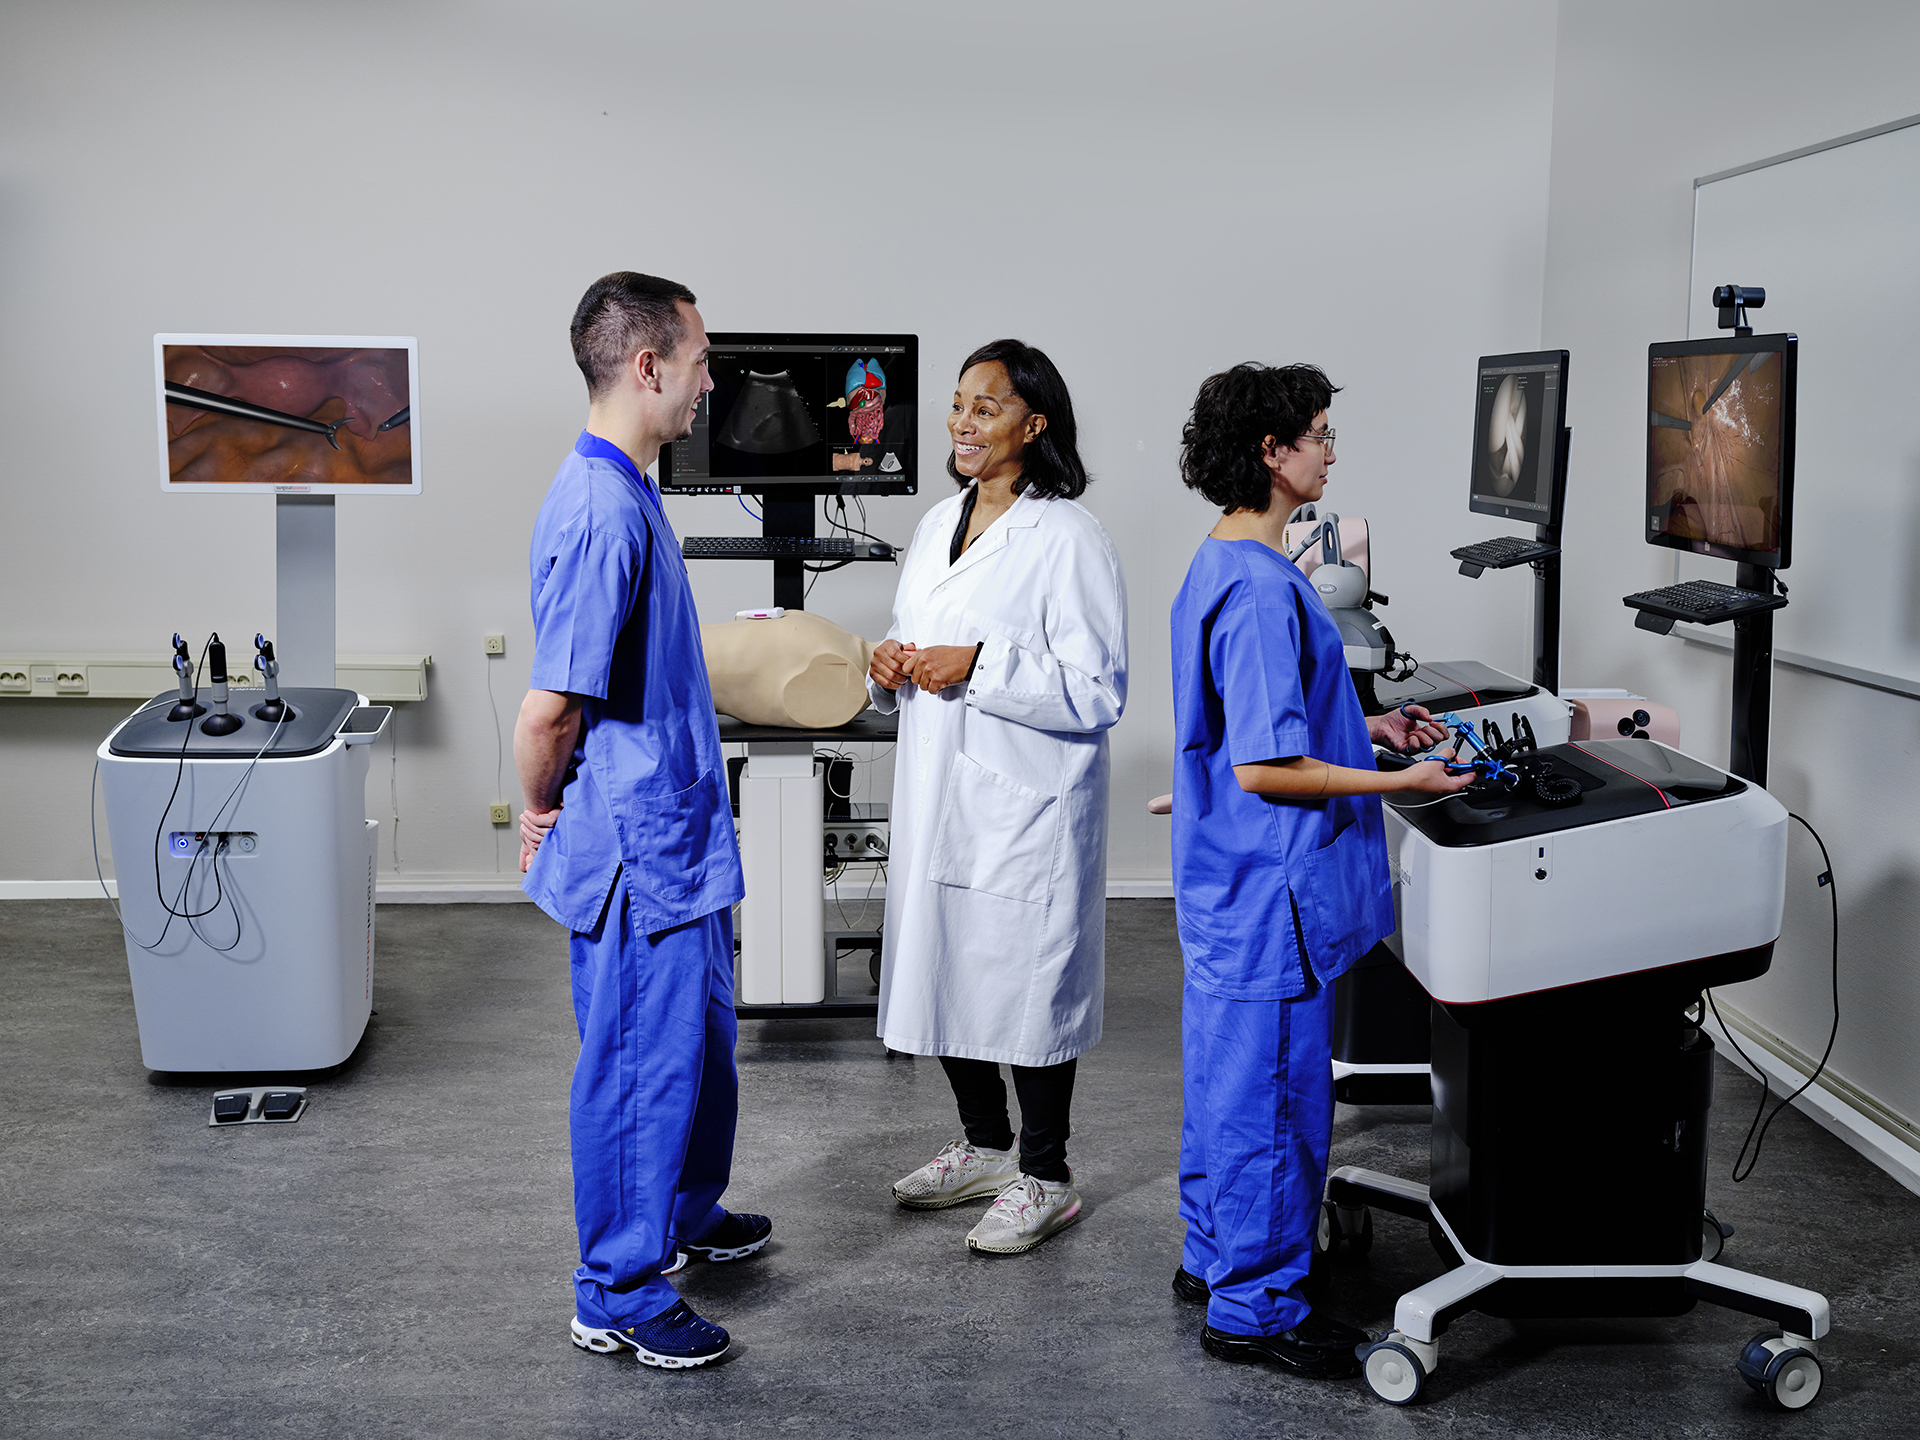 Two doctors talking while another doctor performs a scan